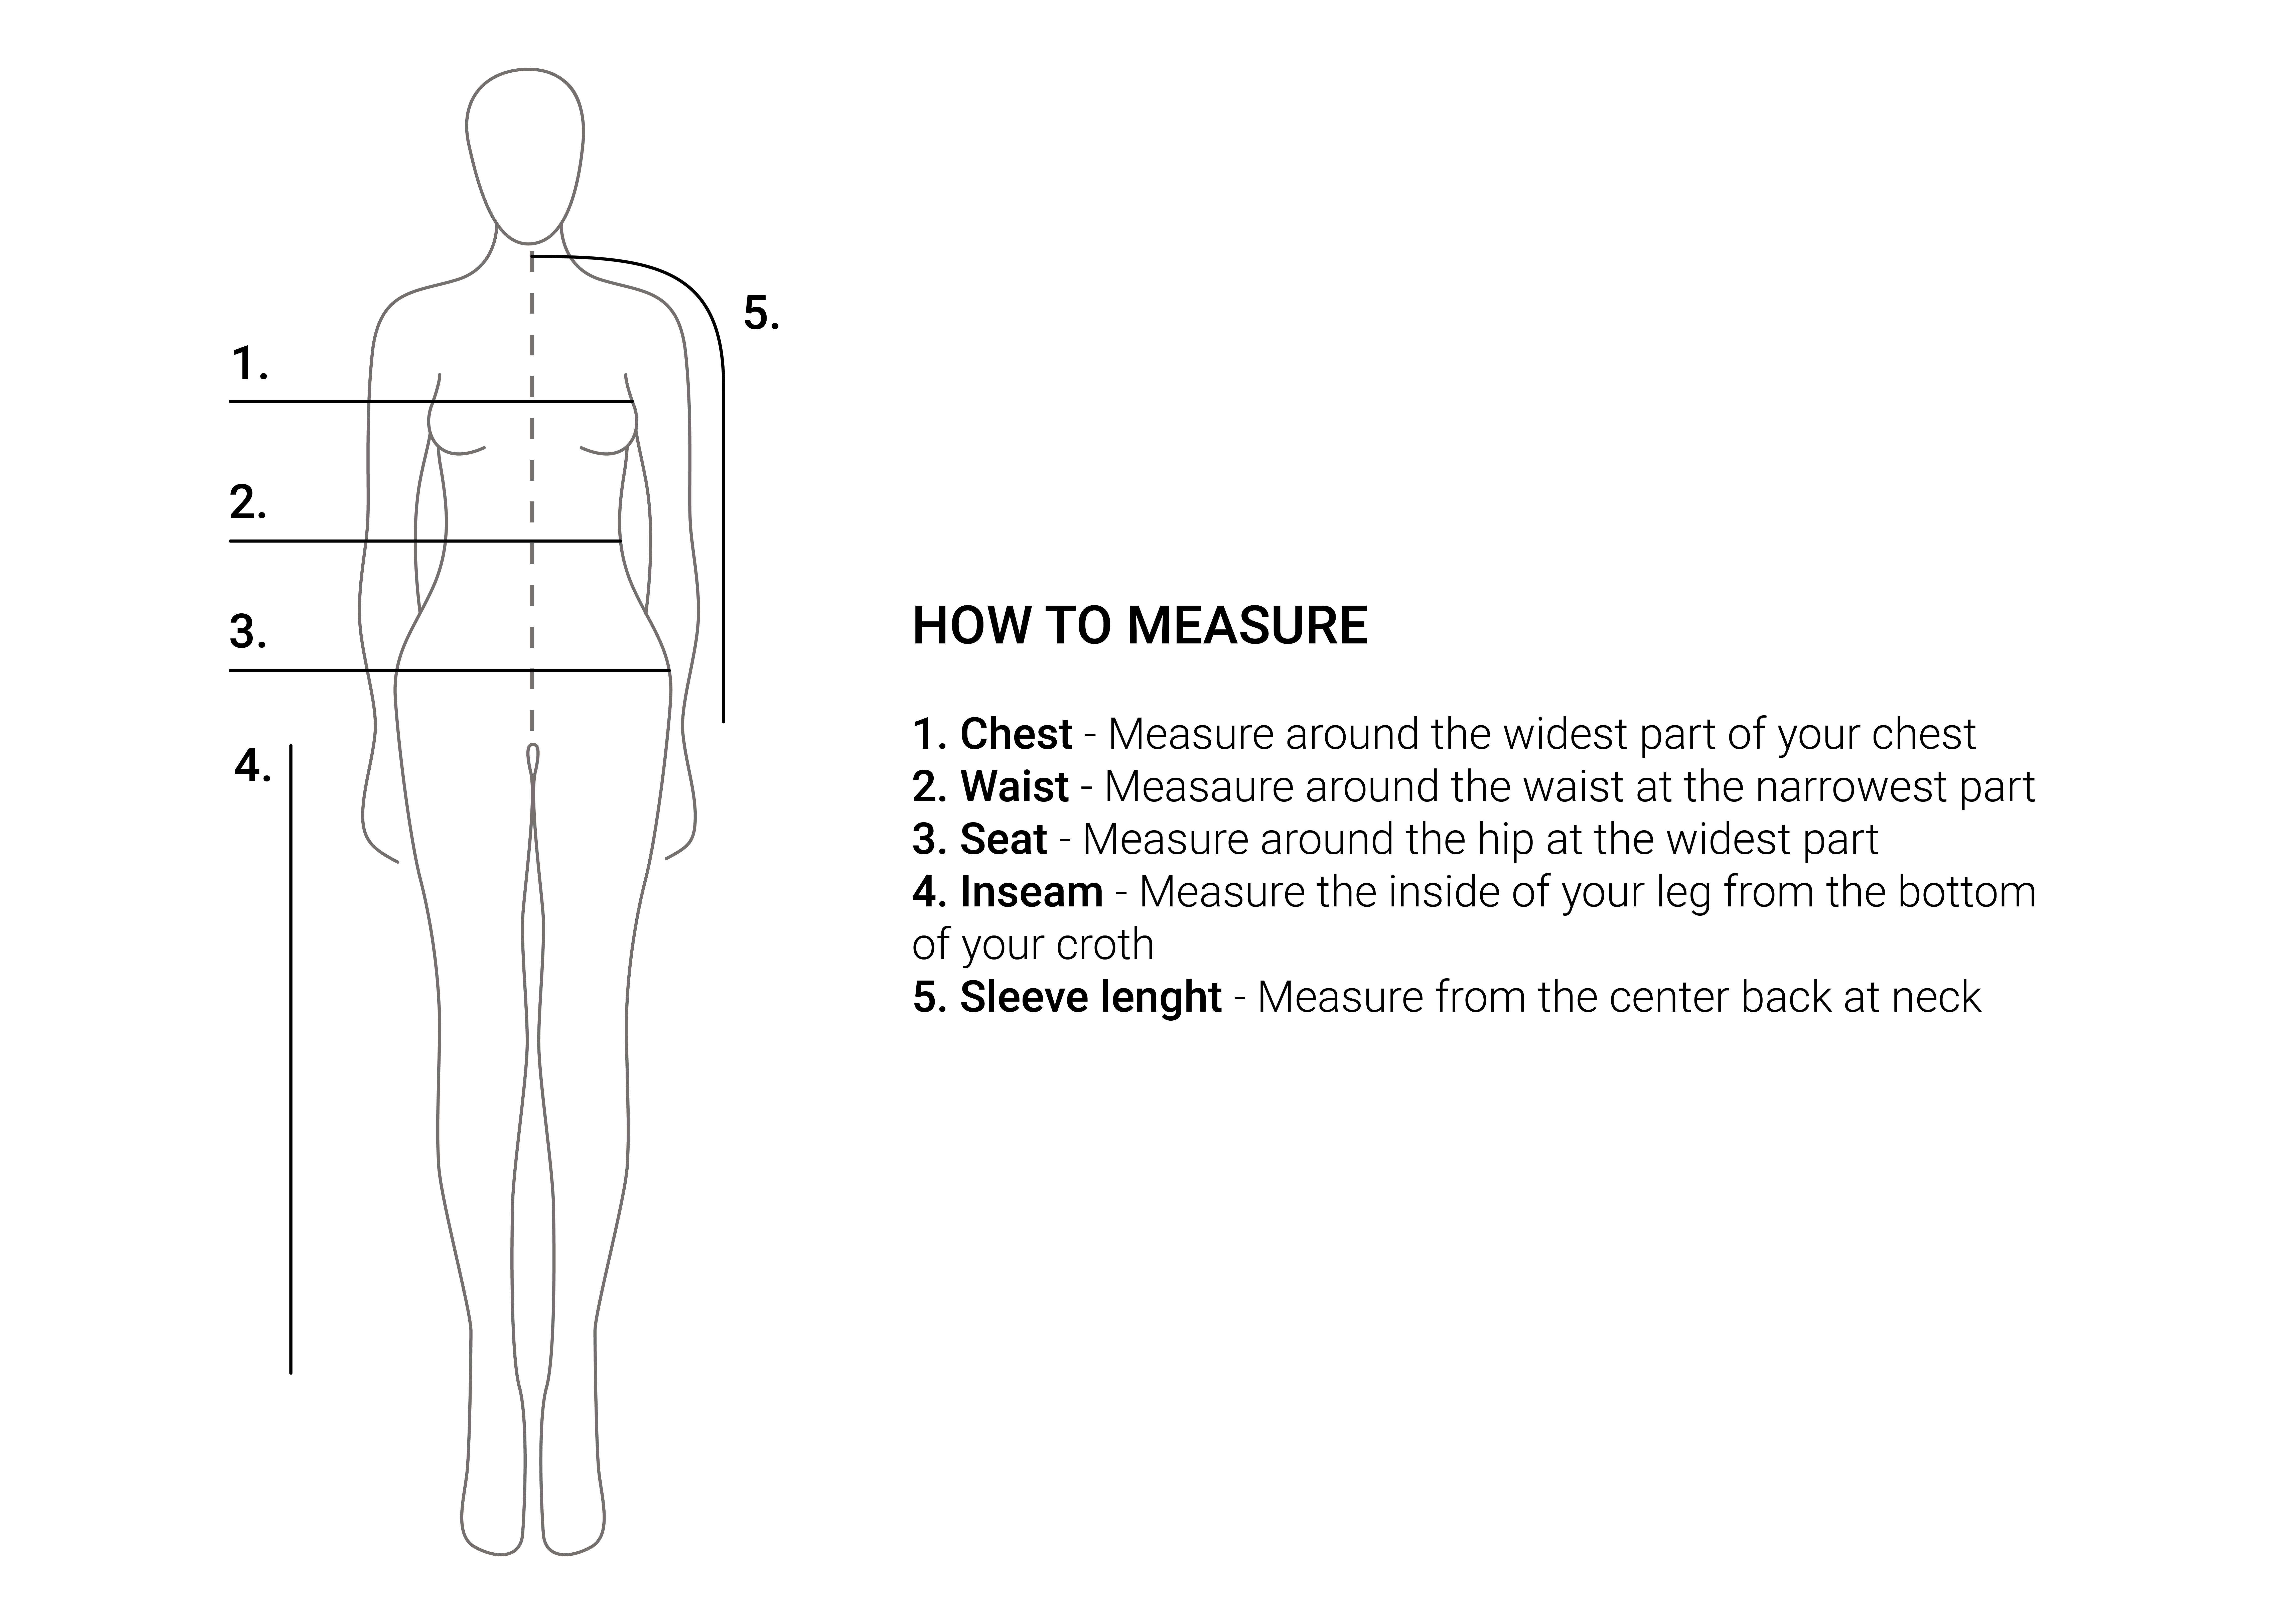 Size Chart, How to Measure for correct fit